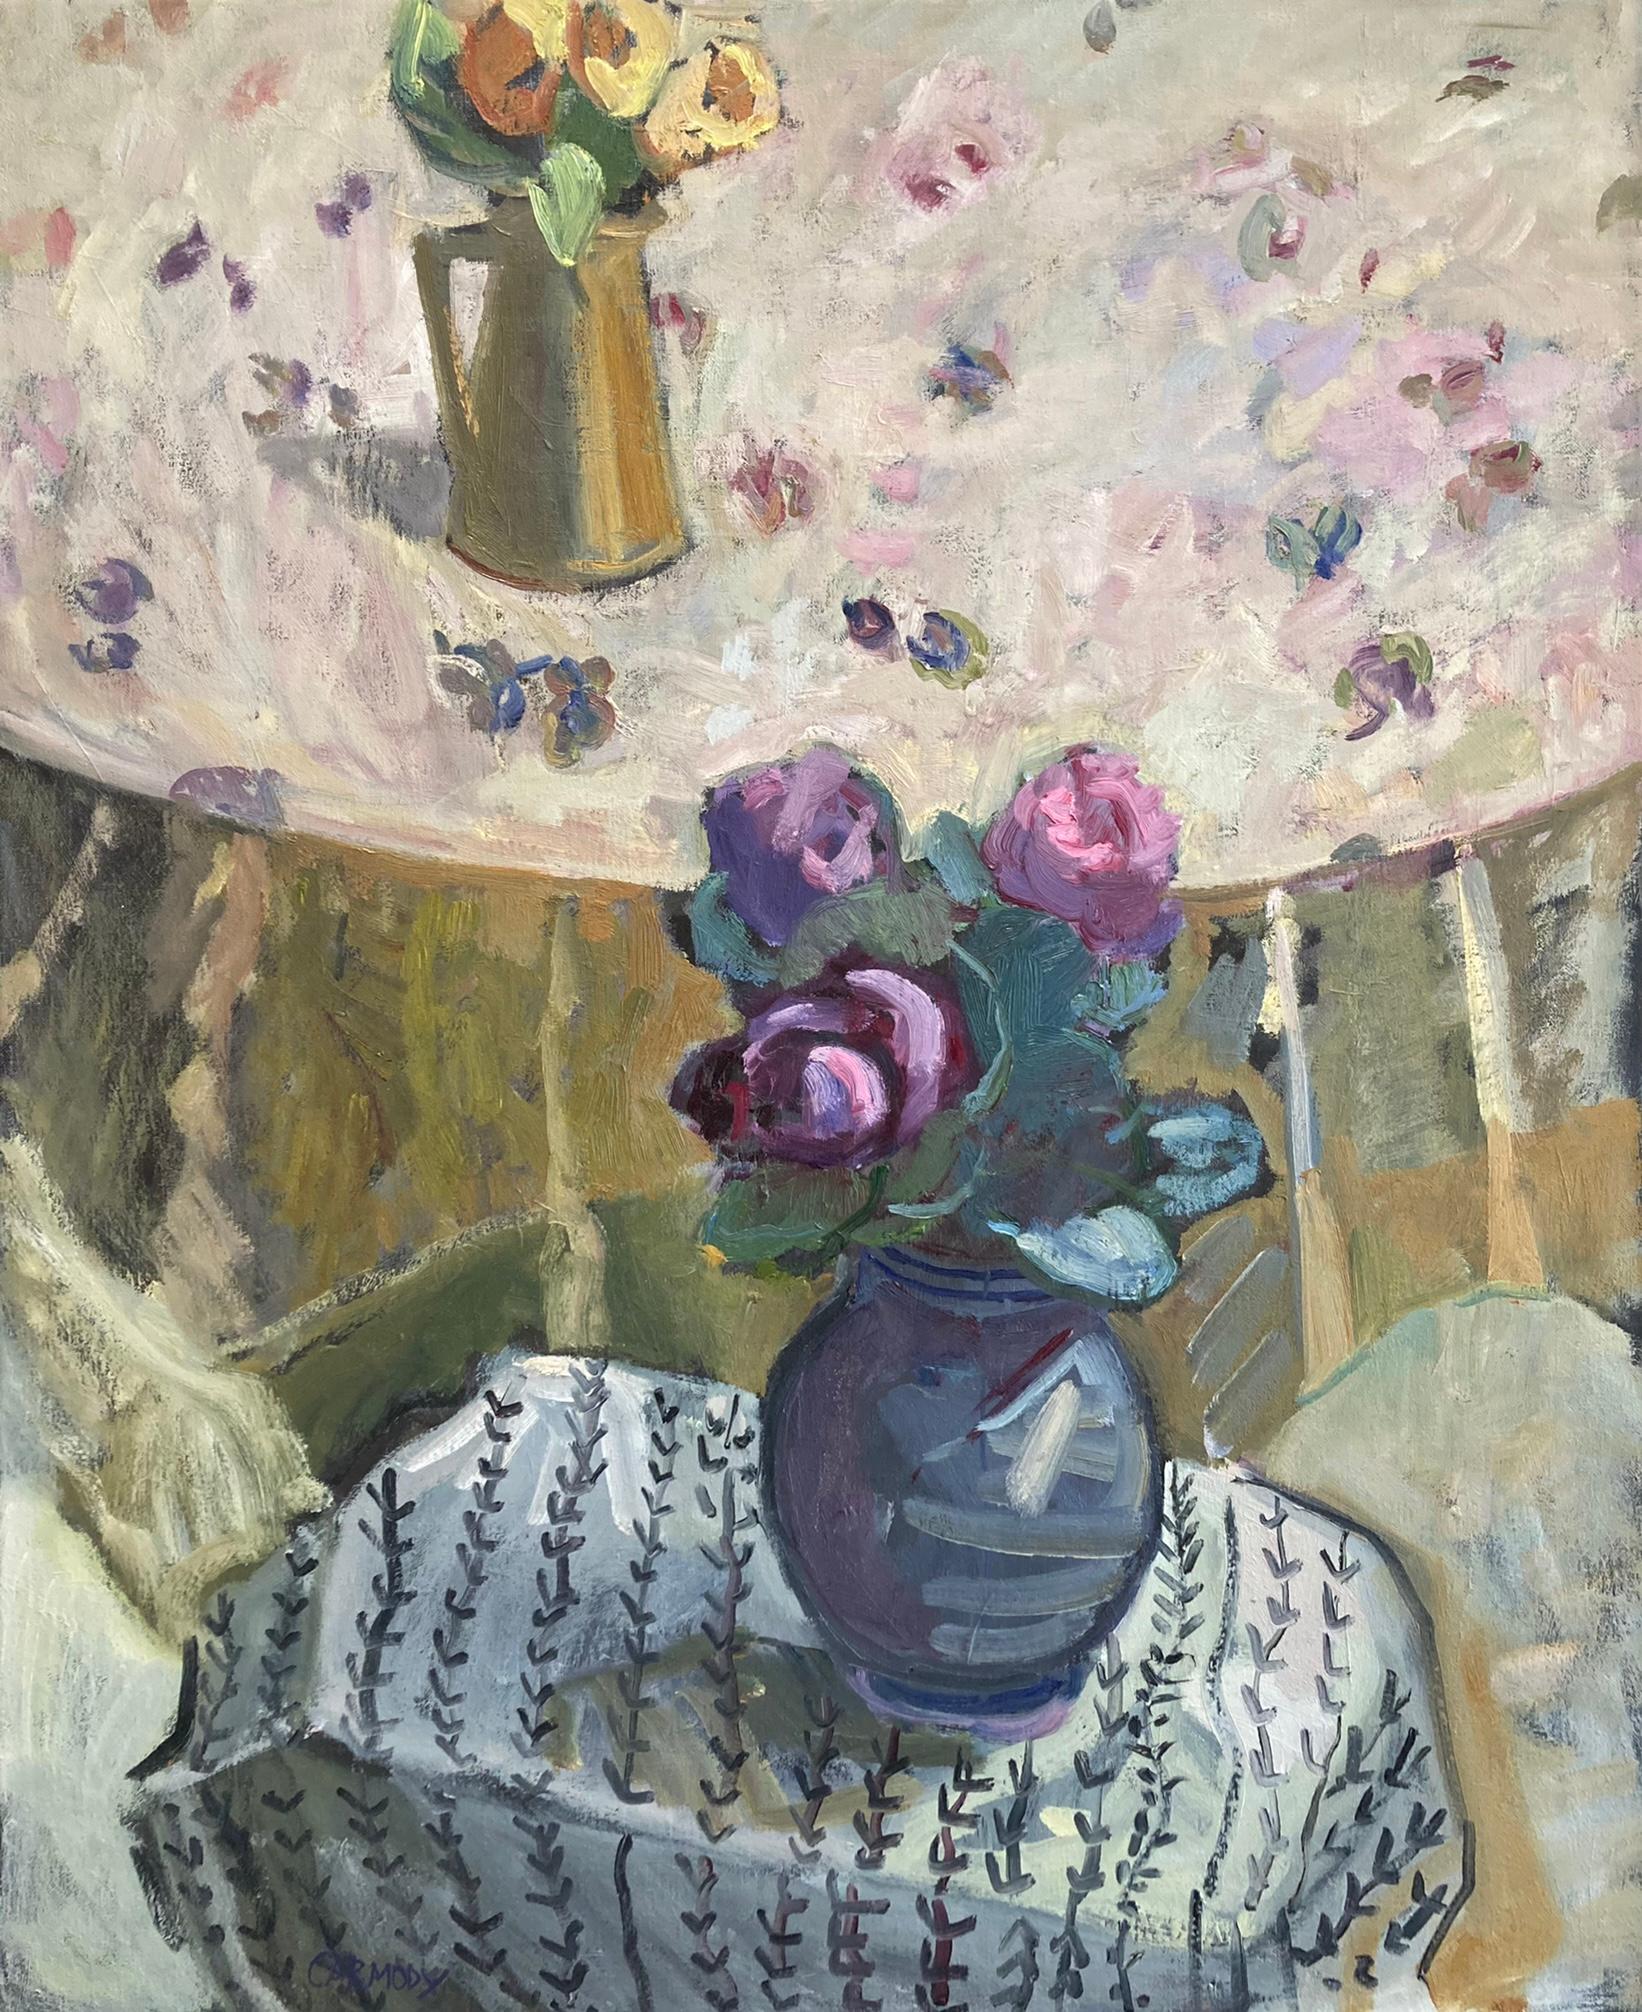 Kelly Carmody Interior Painting - "Kale Flowers" - contemporary still life painting, oil, stylized bonnard-esque